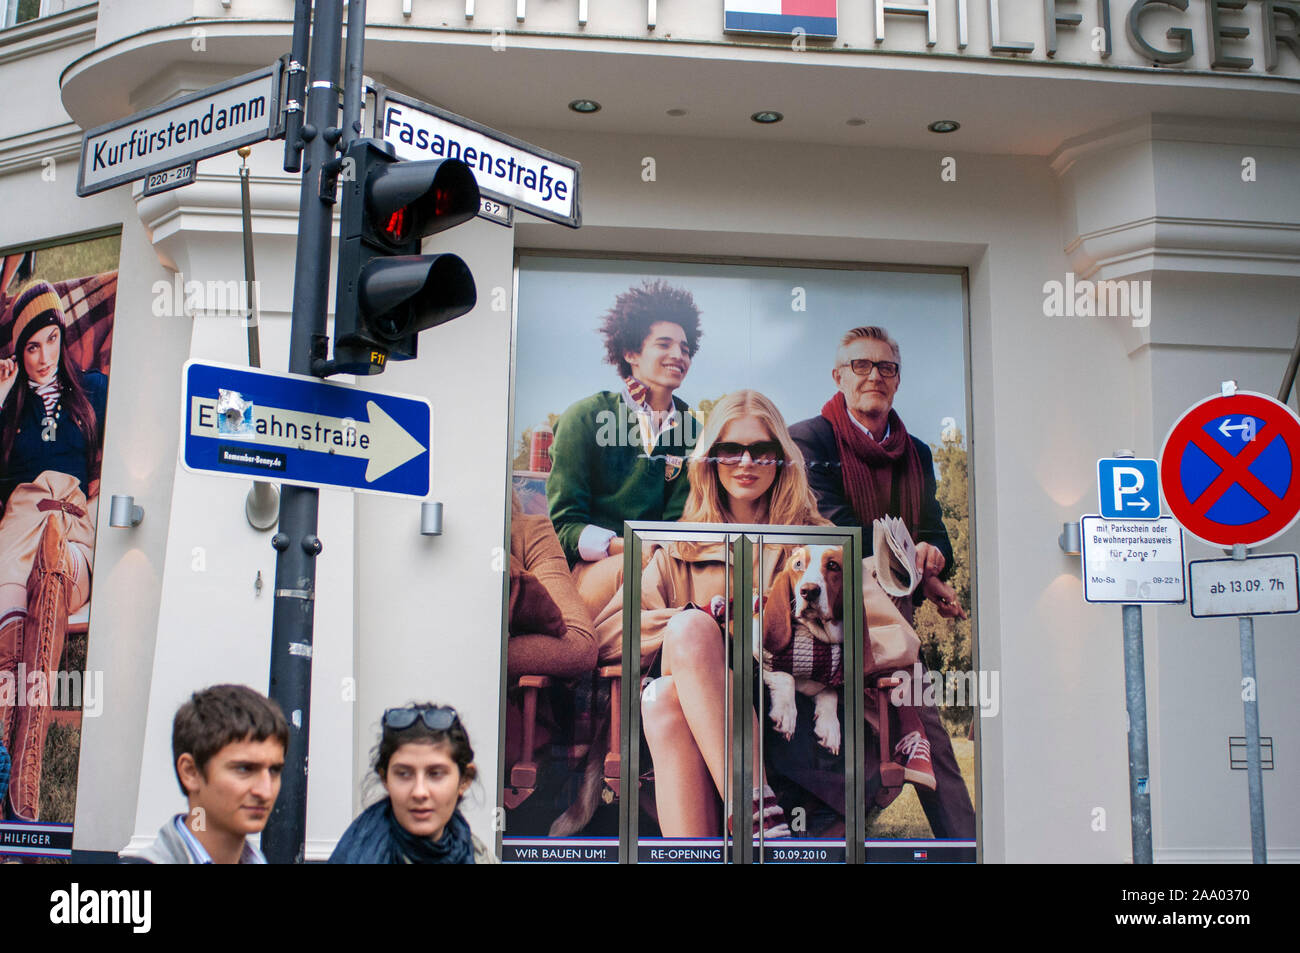 Confluence of fasanenstrasse and kurfürstenstrasse streets. Tommy Hilfiger. Berlin Germany. Berlin is a shopping paradise. From traditional and new de Stock Photo